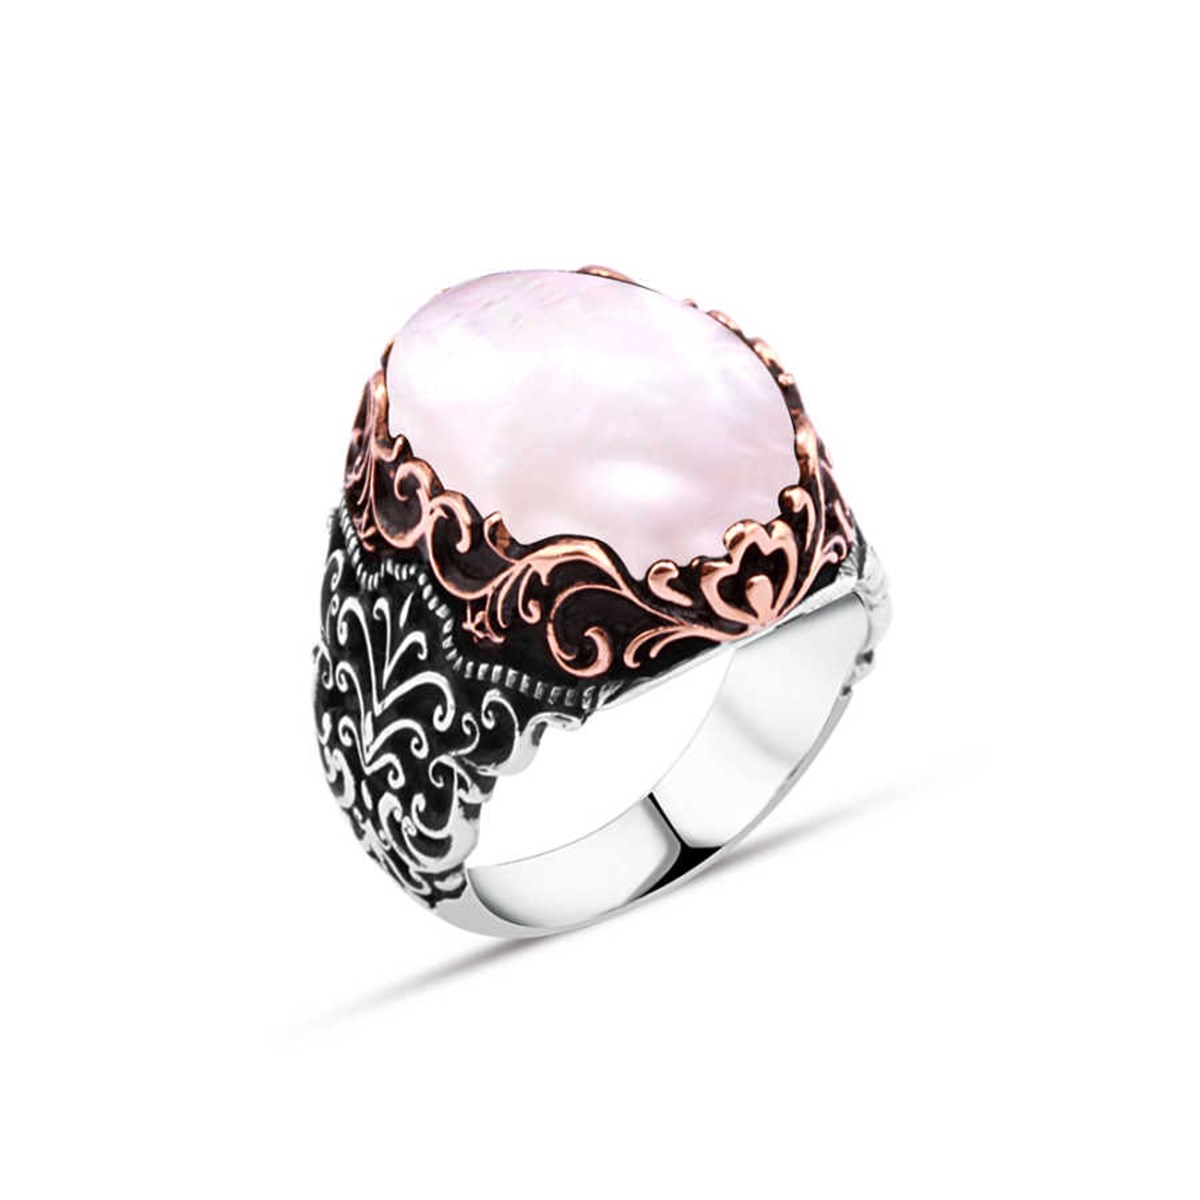 Mother of Pearl Stone Silver Men's Ring